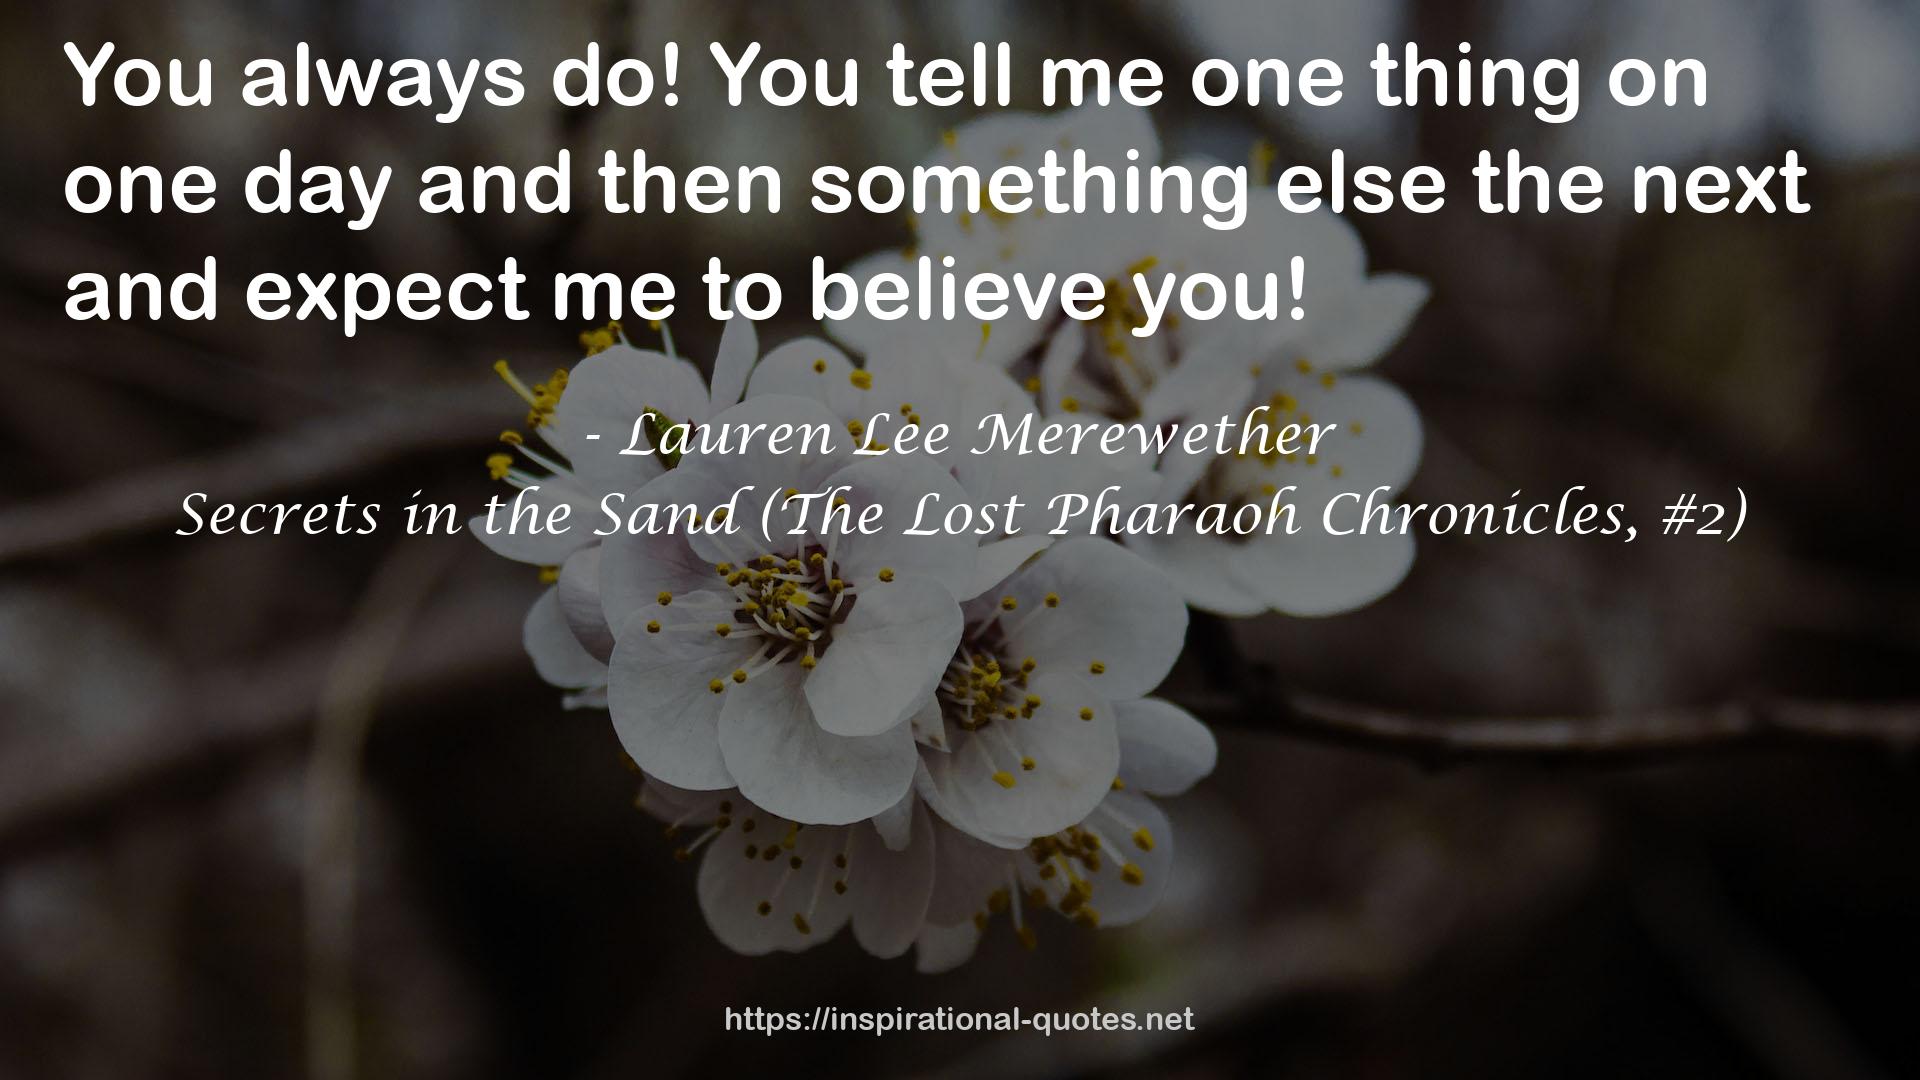 Secrets in the Sand (The Lost Pharaoh Chronicles, #2) QUOTES